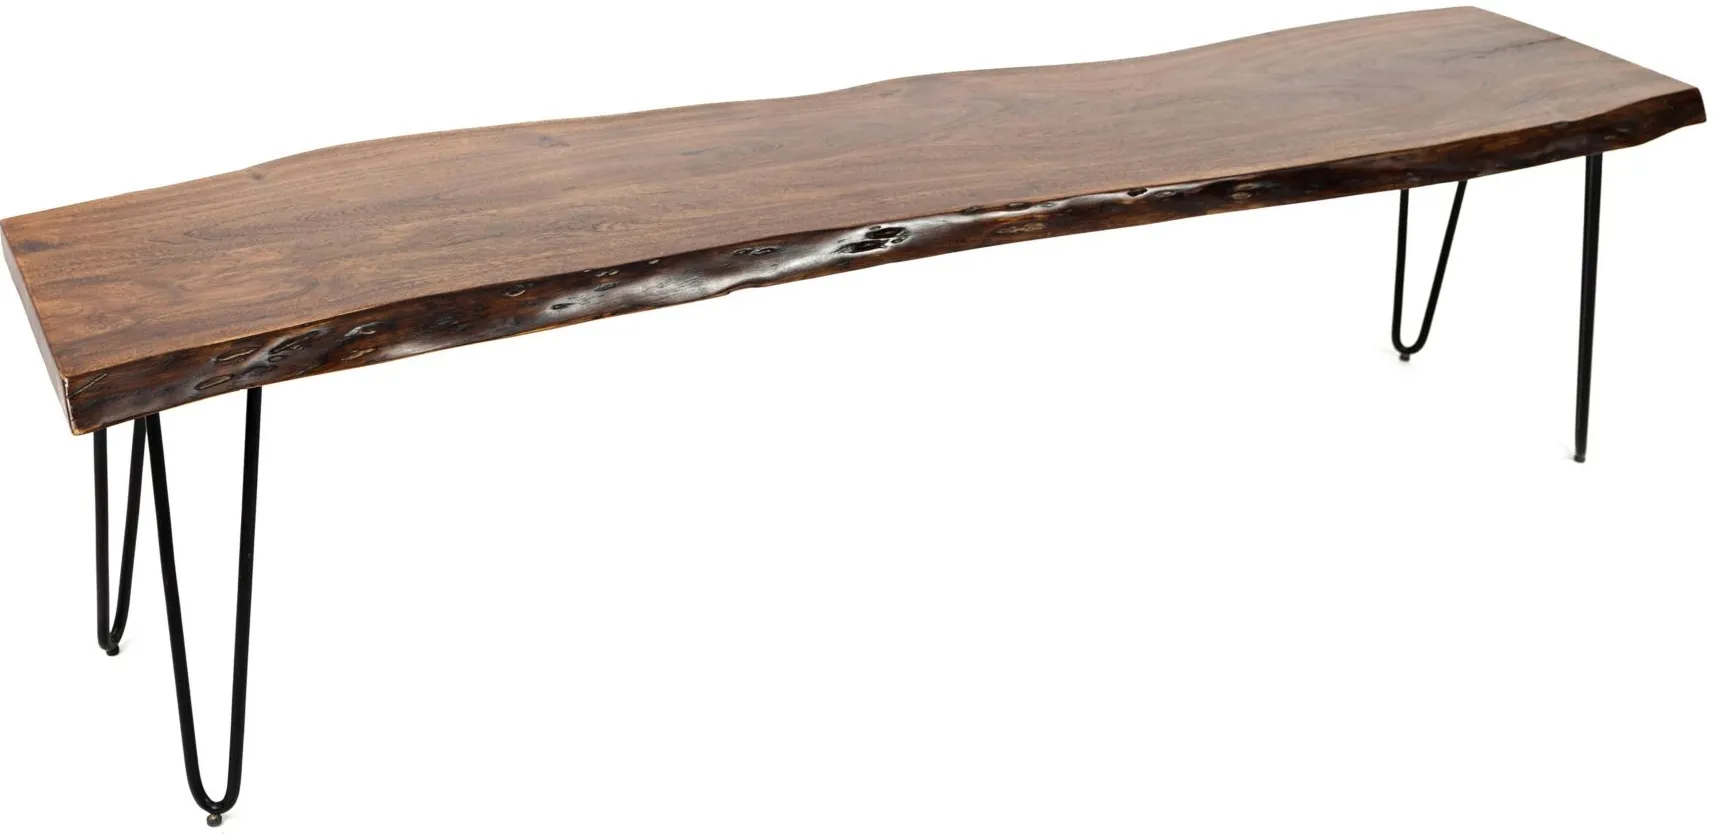 Nature's Live Edge Dining Bench in Rich Brown by Jofran